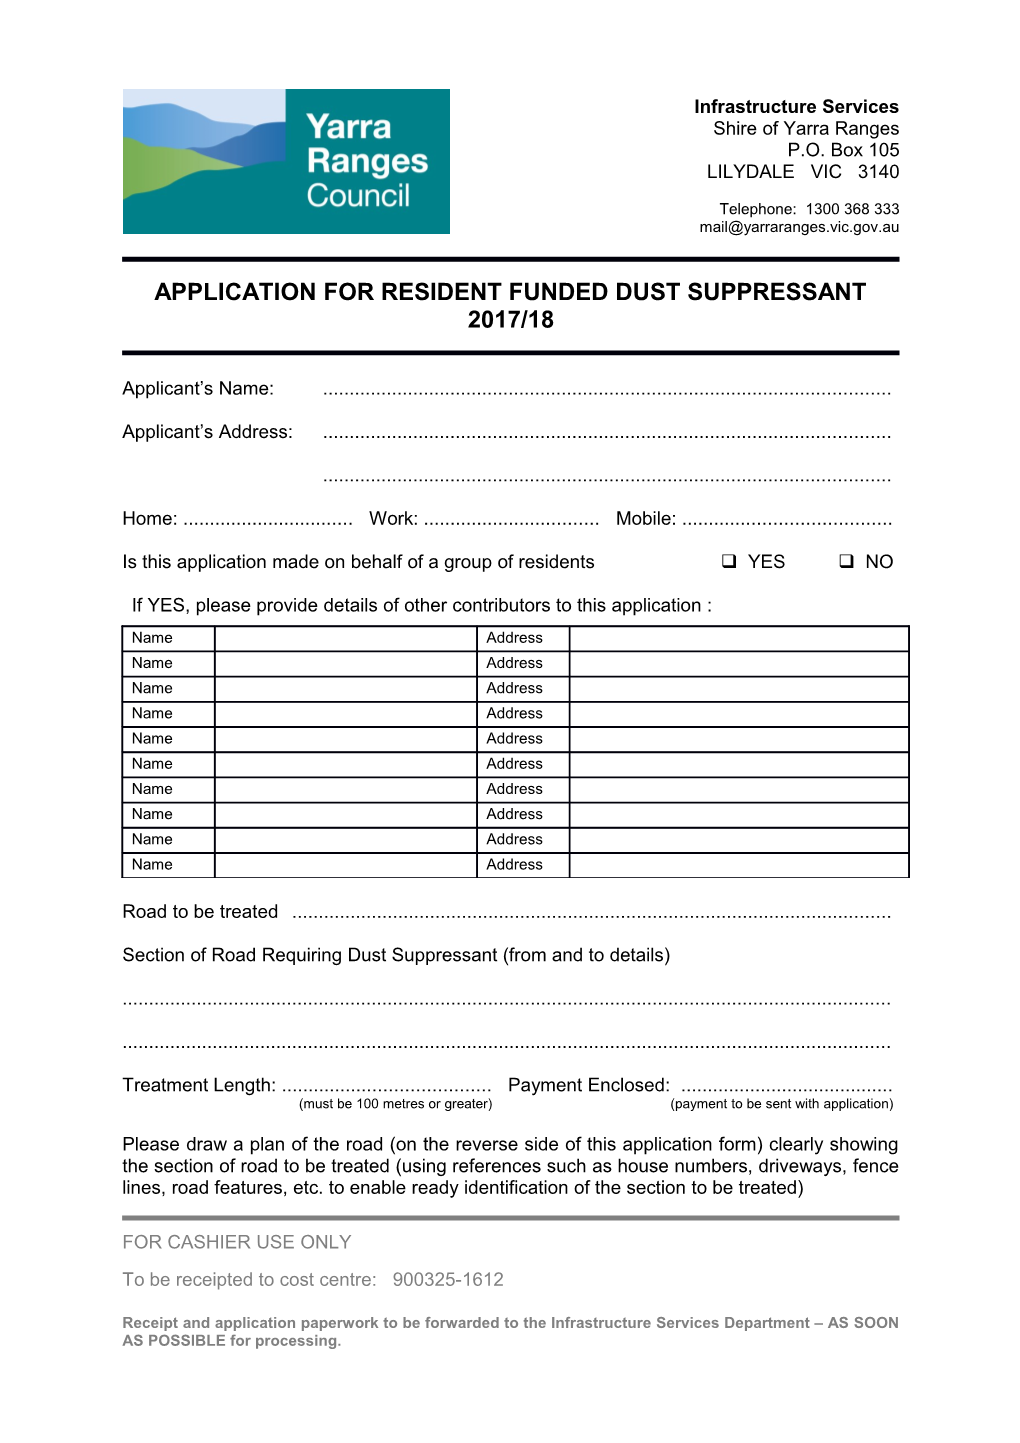 Application for Resident Funded Dust Suppressant 2017/18